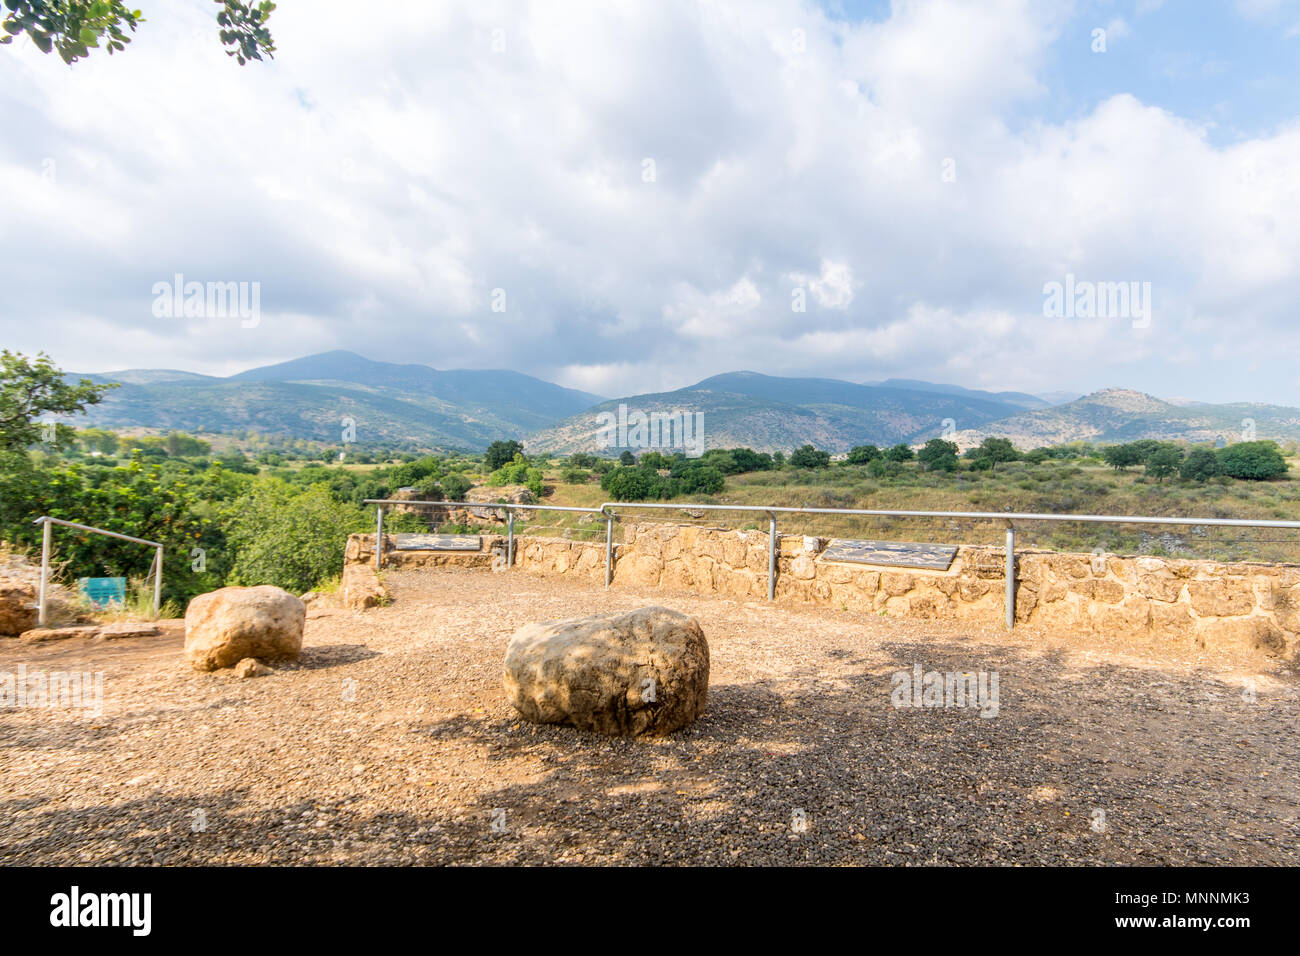 Landscape in the Hermon Stream (Banias) Nature Reserve, Northern Israel Stock Photo